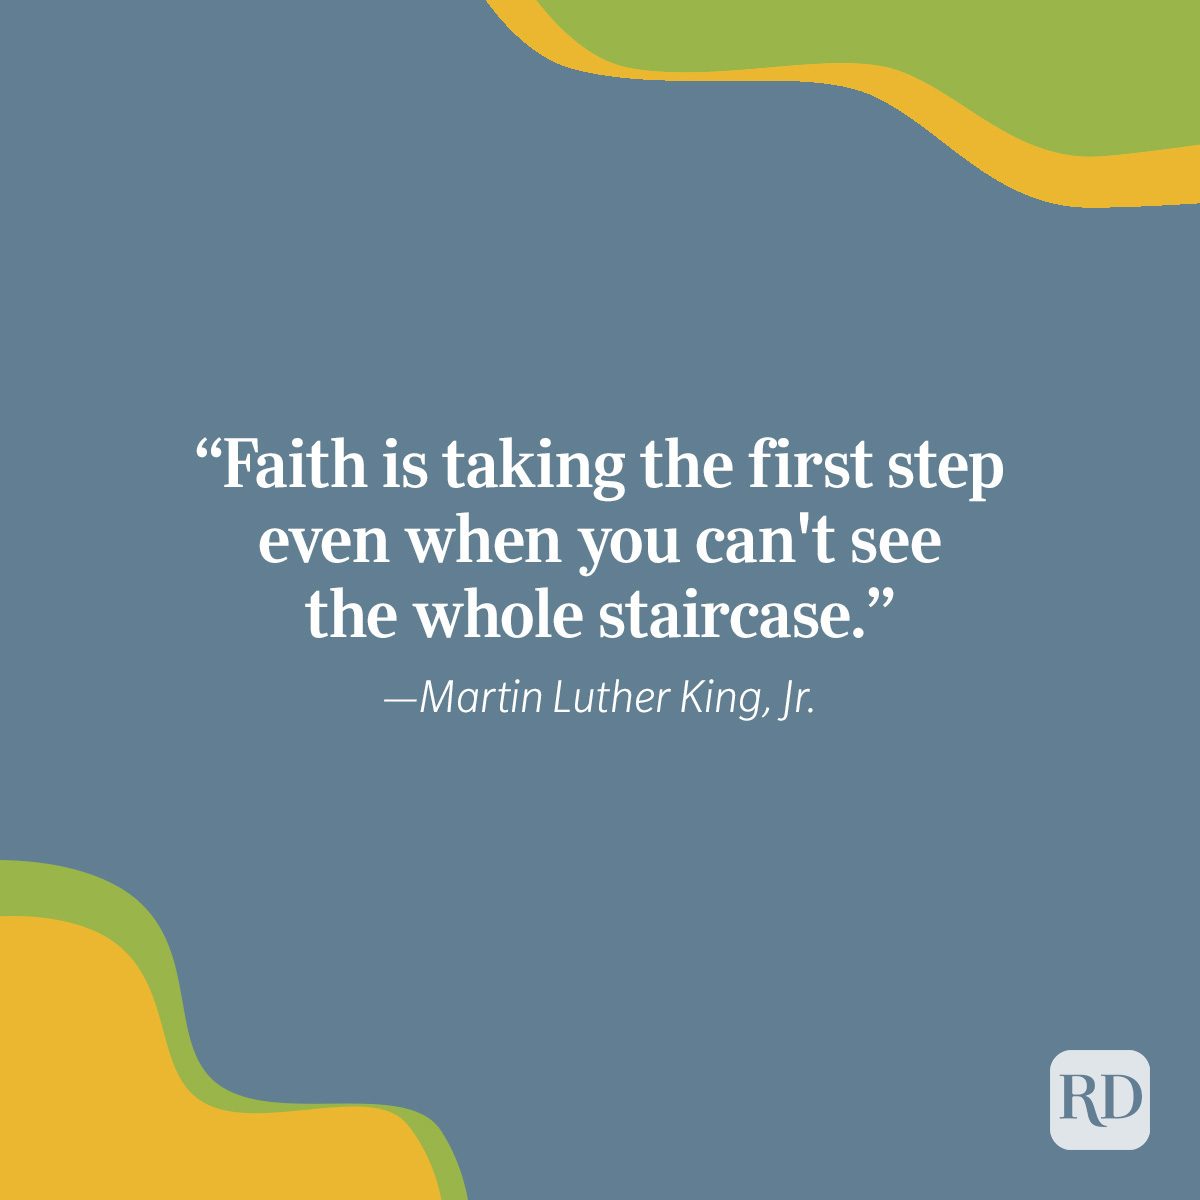 50 Martin Luther King Jr. Quotes that Empower and Inspire